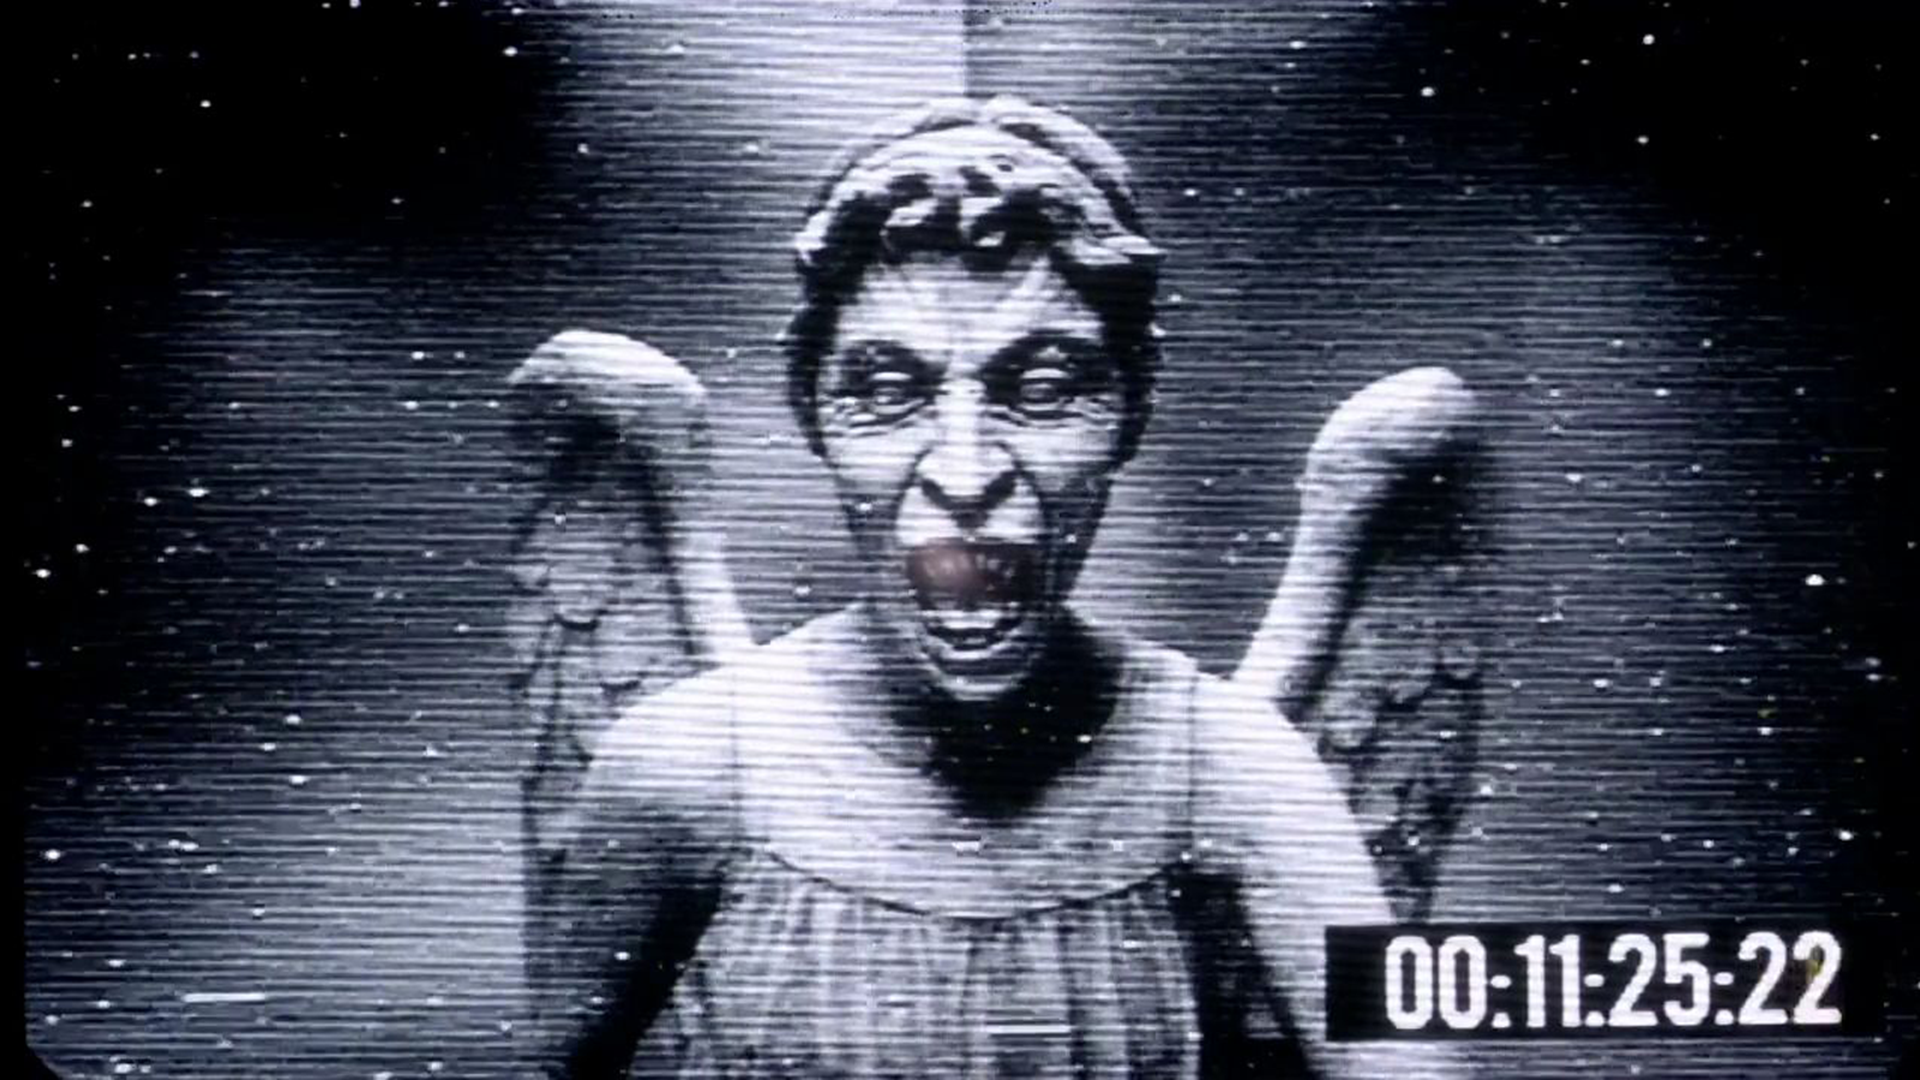 Weeping Angels Wallpaper Set It To Change Every Few Seconds For